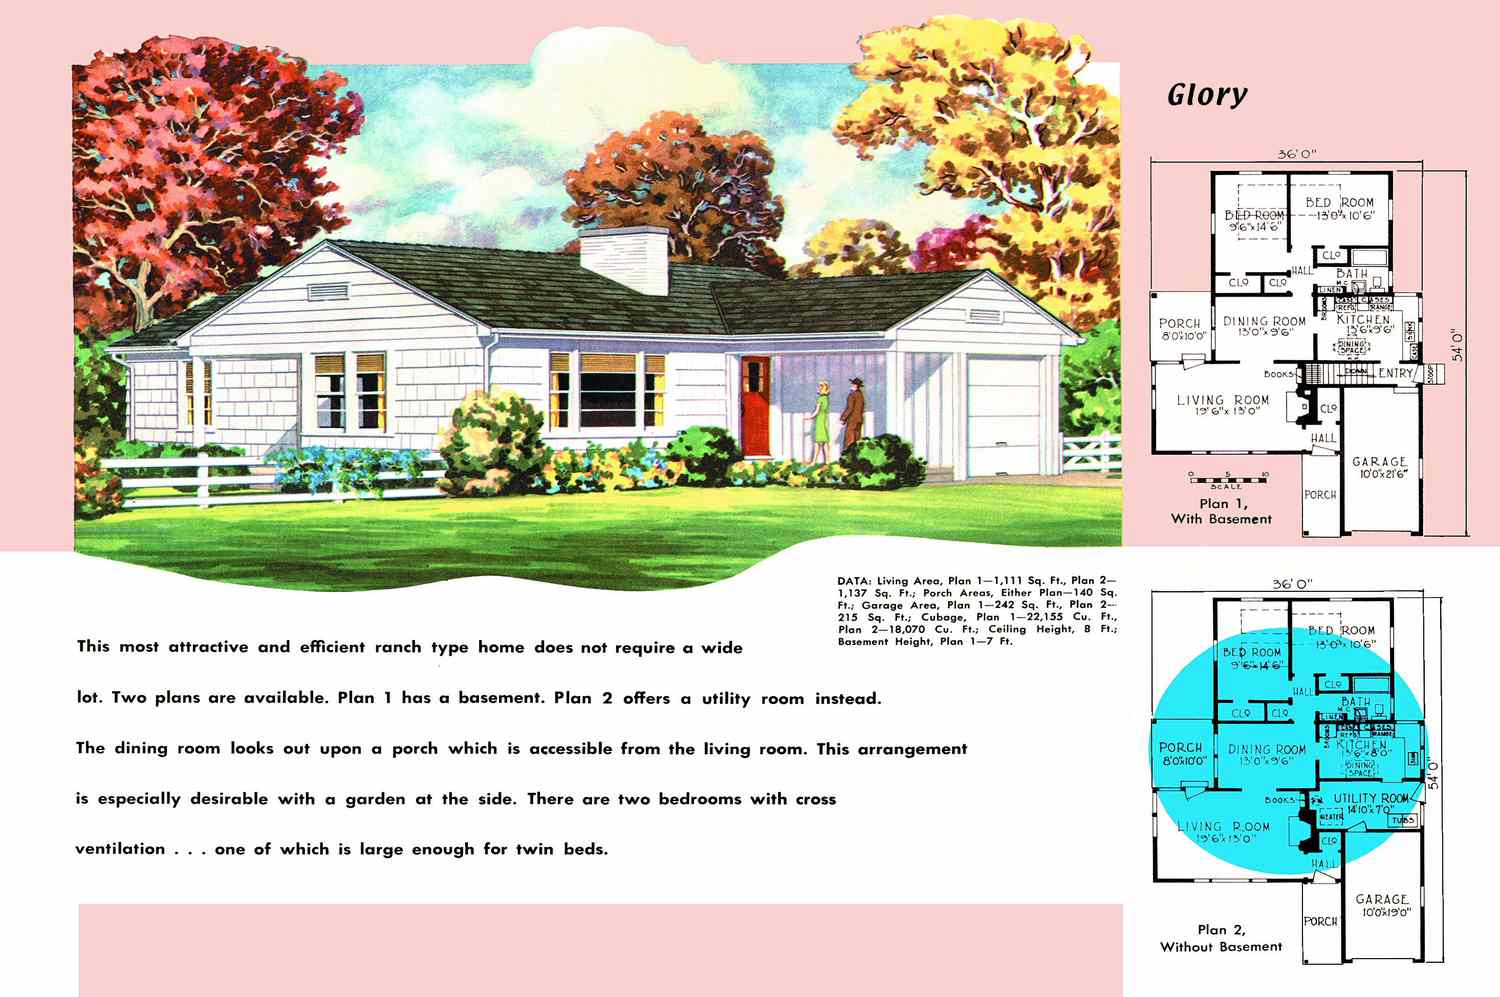 1950s floor plan and rendering of ranch-style house called Glory